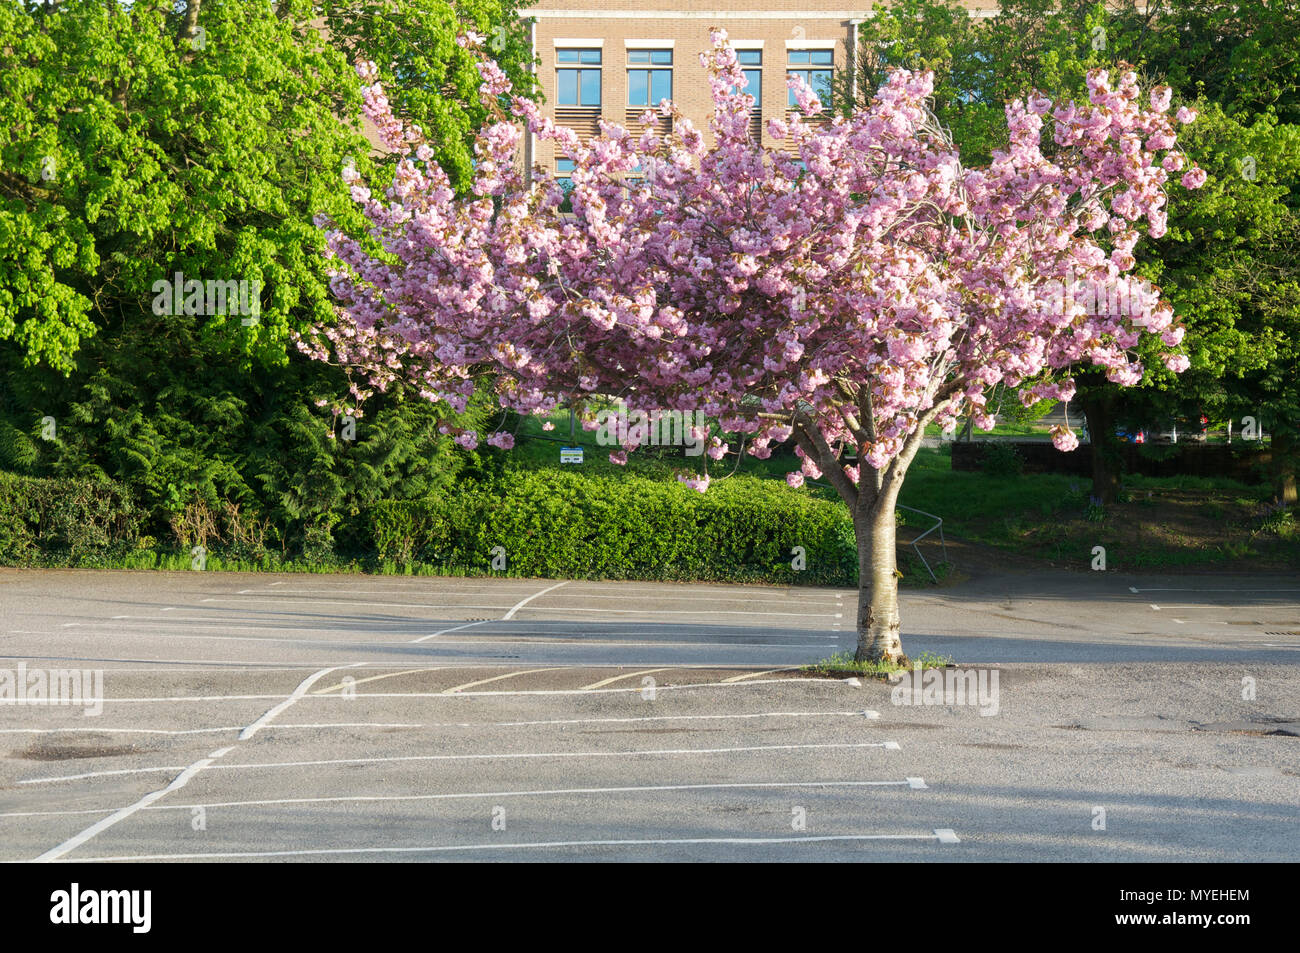 Ornamental Cherry Blossom Tree, in bloom, growing in an urban car park. These decorative shade trees are tolerant of atmospheric pollution. England UK Stock Photo